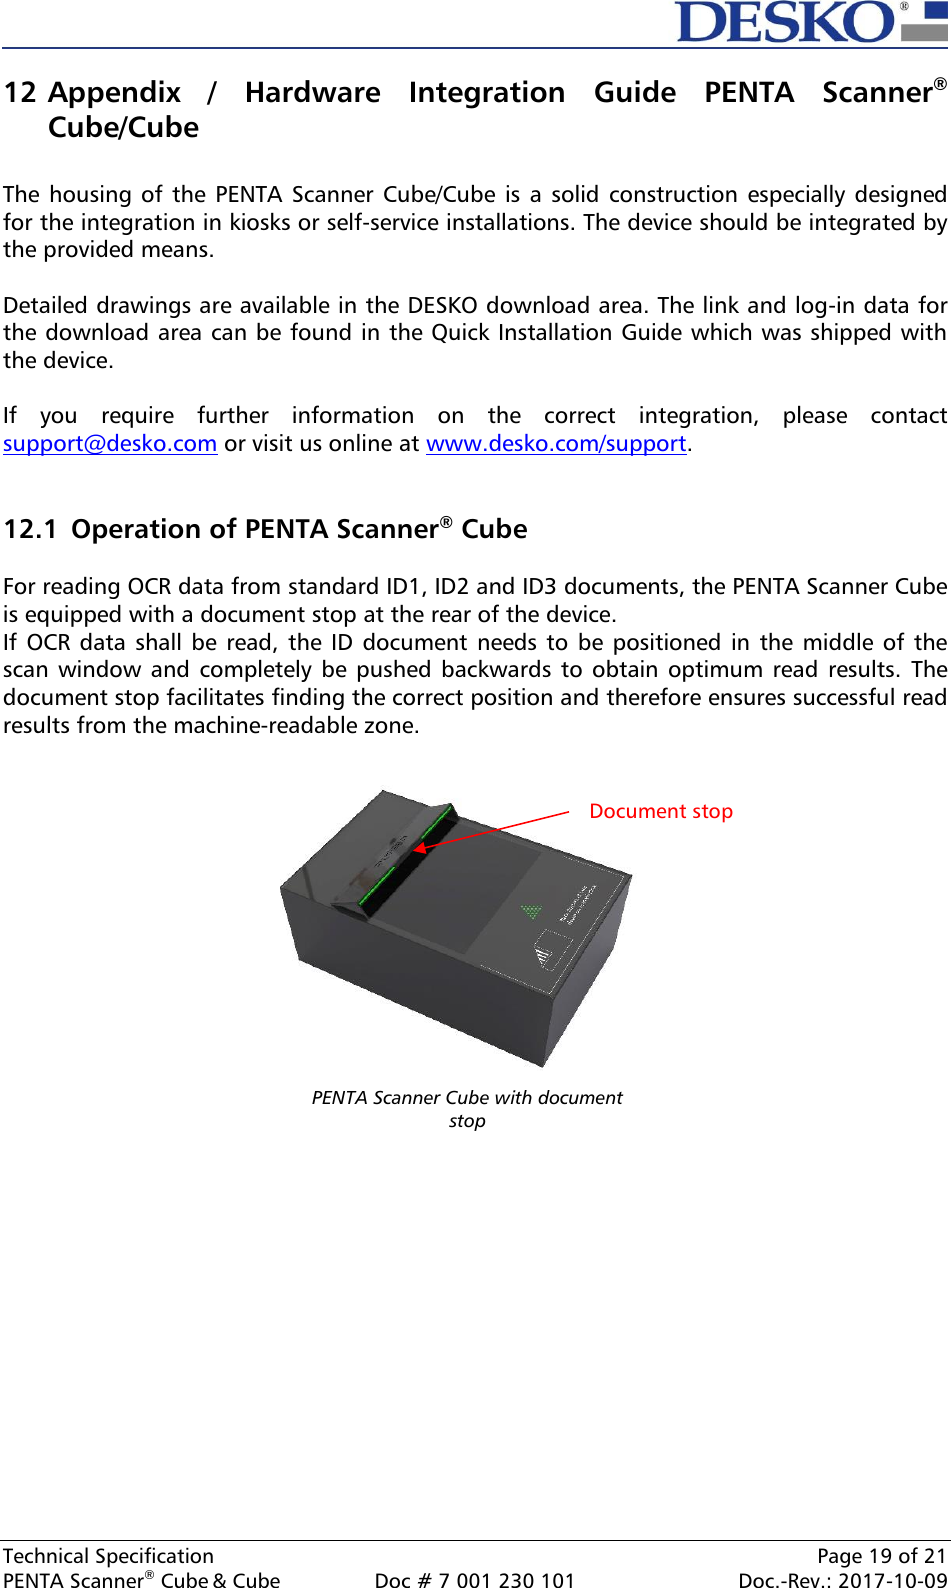  Technical Specification    Page 19 of 21 PENTA Scanner® Cube &amp; Cube  Doc # 7 001 230 101  Doc.-Rev.: 2017-10-09    12 Appendix  /  Hardware  Integration  Guide  PENTA  Scanner® Cube/Cube  The housing  of the  PENTA Scanner  Cube/Cube is  a solid  construction  especially designed for the integration in kiosks or self-service installations. The device should be integrated by the provided means.   Detailed drawings are available in the DESKO download area. The link and log-in data for the download area can be found in the Quick Installation Guide which was shipped with the device.   If  you  require  further  information  on  the  correct  integration,  please  contact support@desko.com or visit us online at www.desko.com/support.    12.1  Operation of PENTA Scanner® Cube  For reading OCR data from standard ID1, ID2 and ID3 documents, the PENTA Scanner Cube is equipped with a document stop at the rear of the device. If OCR  data shall be  read, the  ID  document needs to  be positioned in  the middle of  the scan window and  completely be pushed backwards  to obtain optimum read  results.  The document stop facilitates finding the correct position and therefore ensures successful read results from the machine-readable zone.    Document stop PENTA Scanner Cube with document stop  